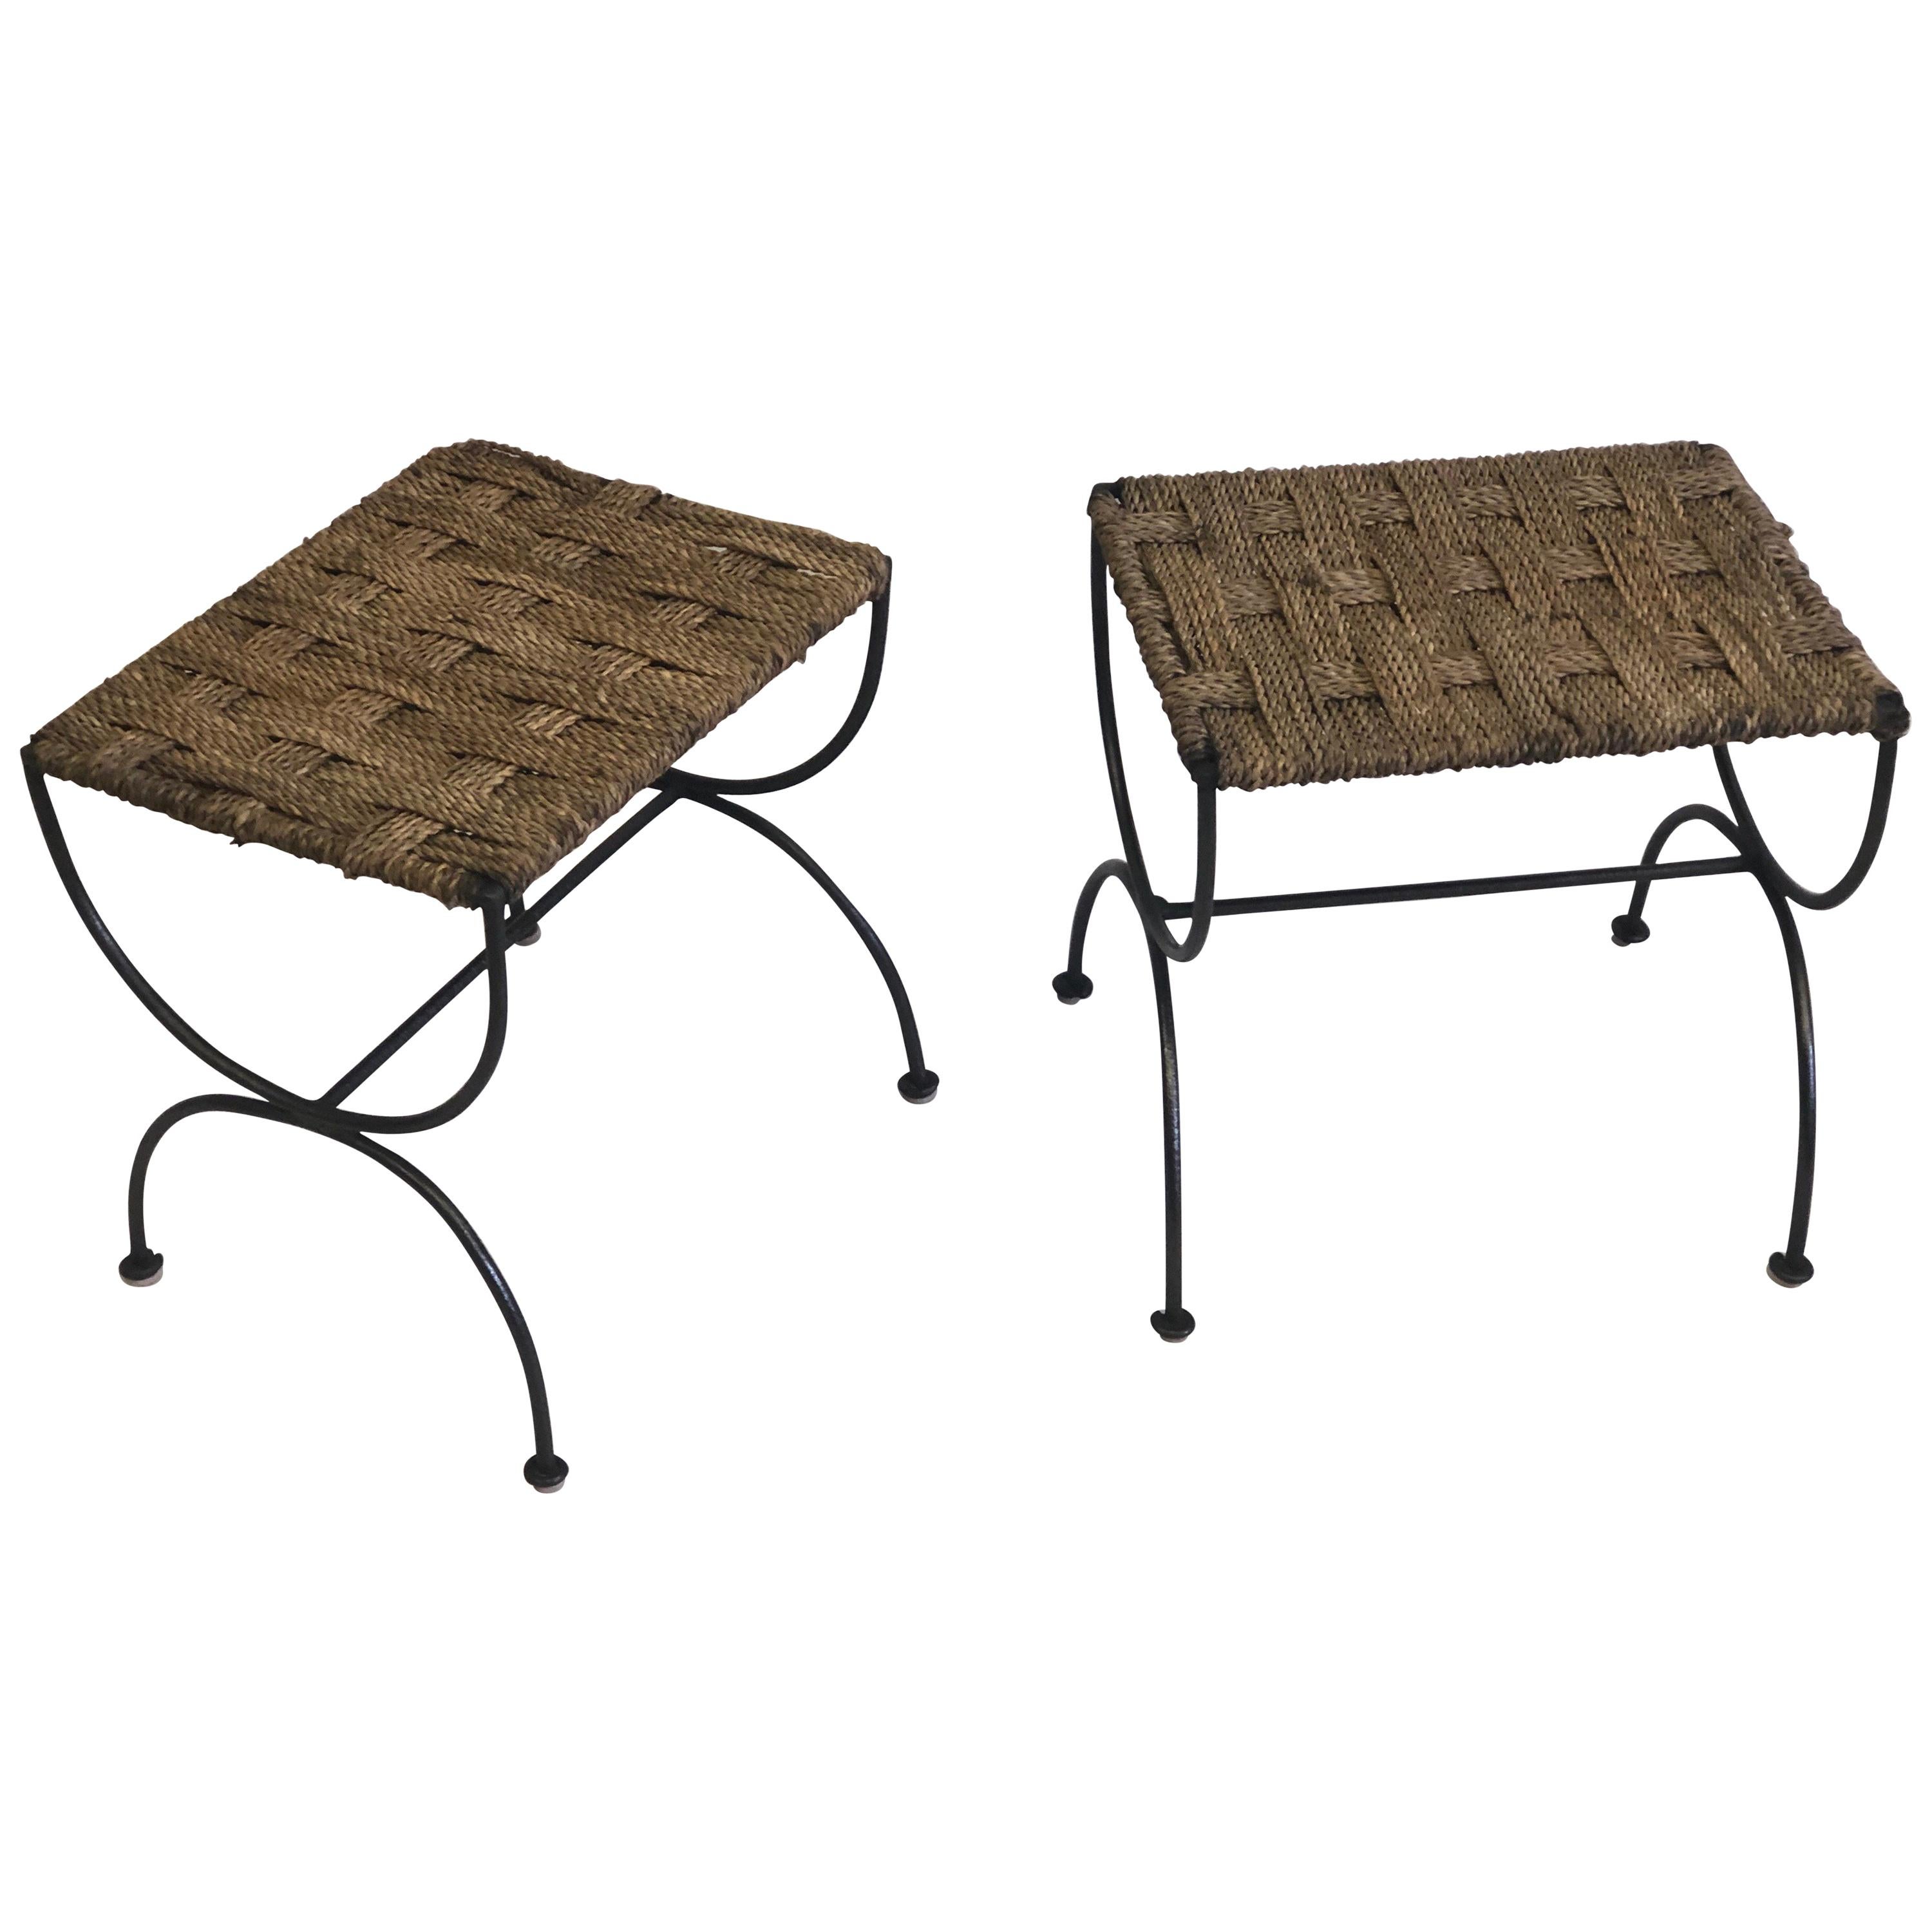 Pair of French Mid-Century Modern Iron & Rope Stools/Benches, Jean Michel Frank